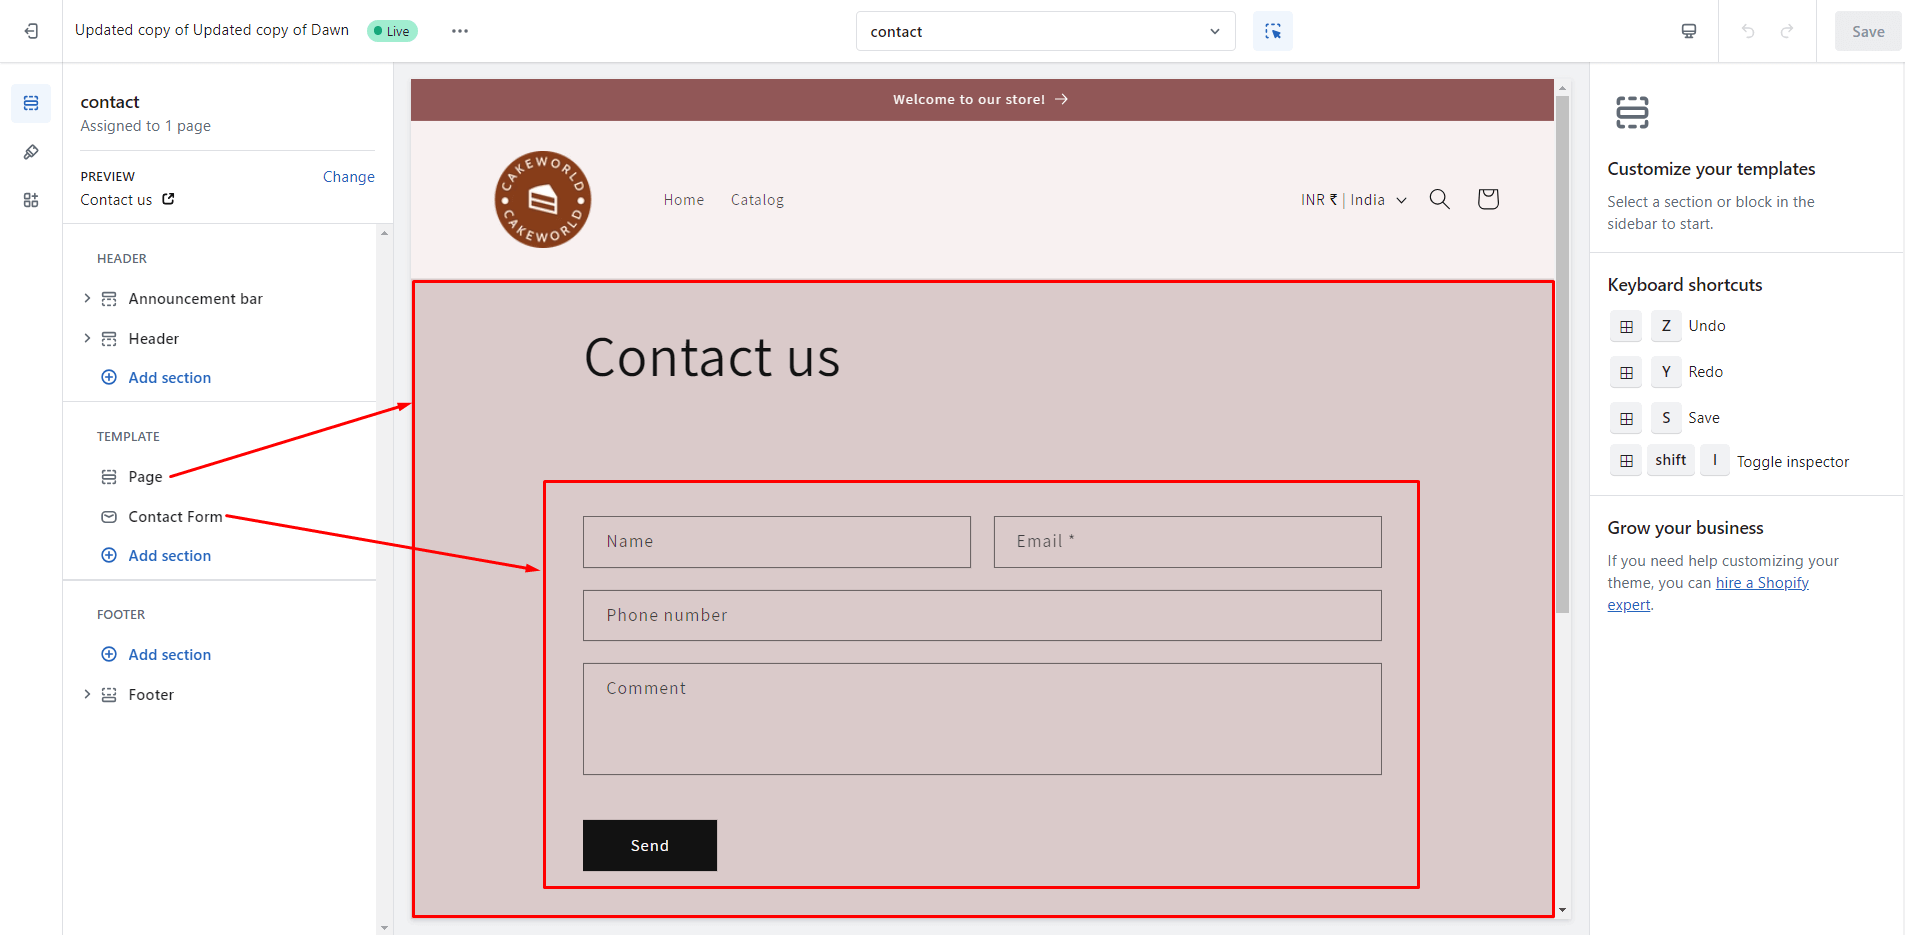 dawn theme contact page